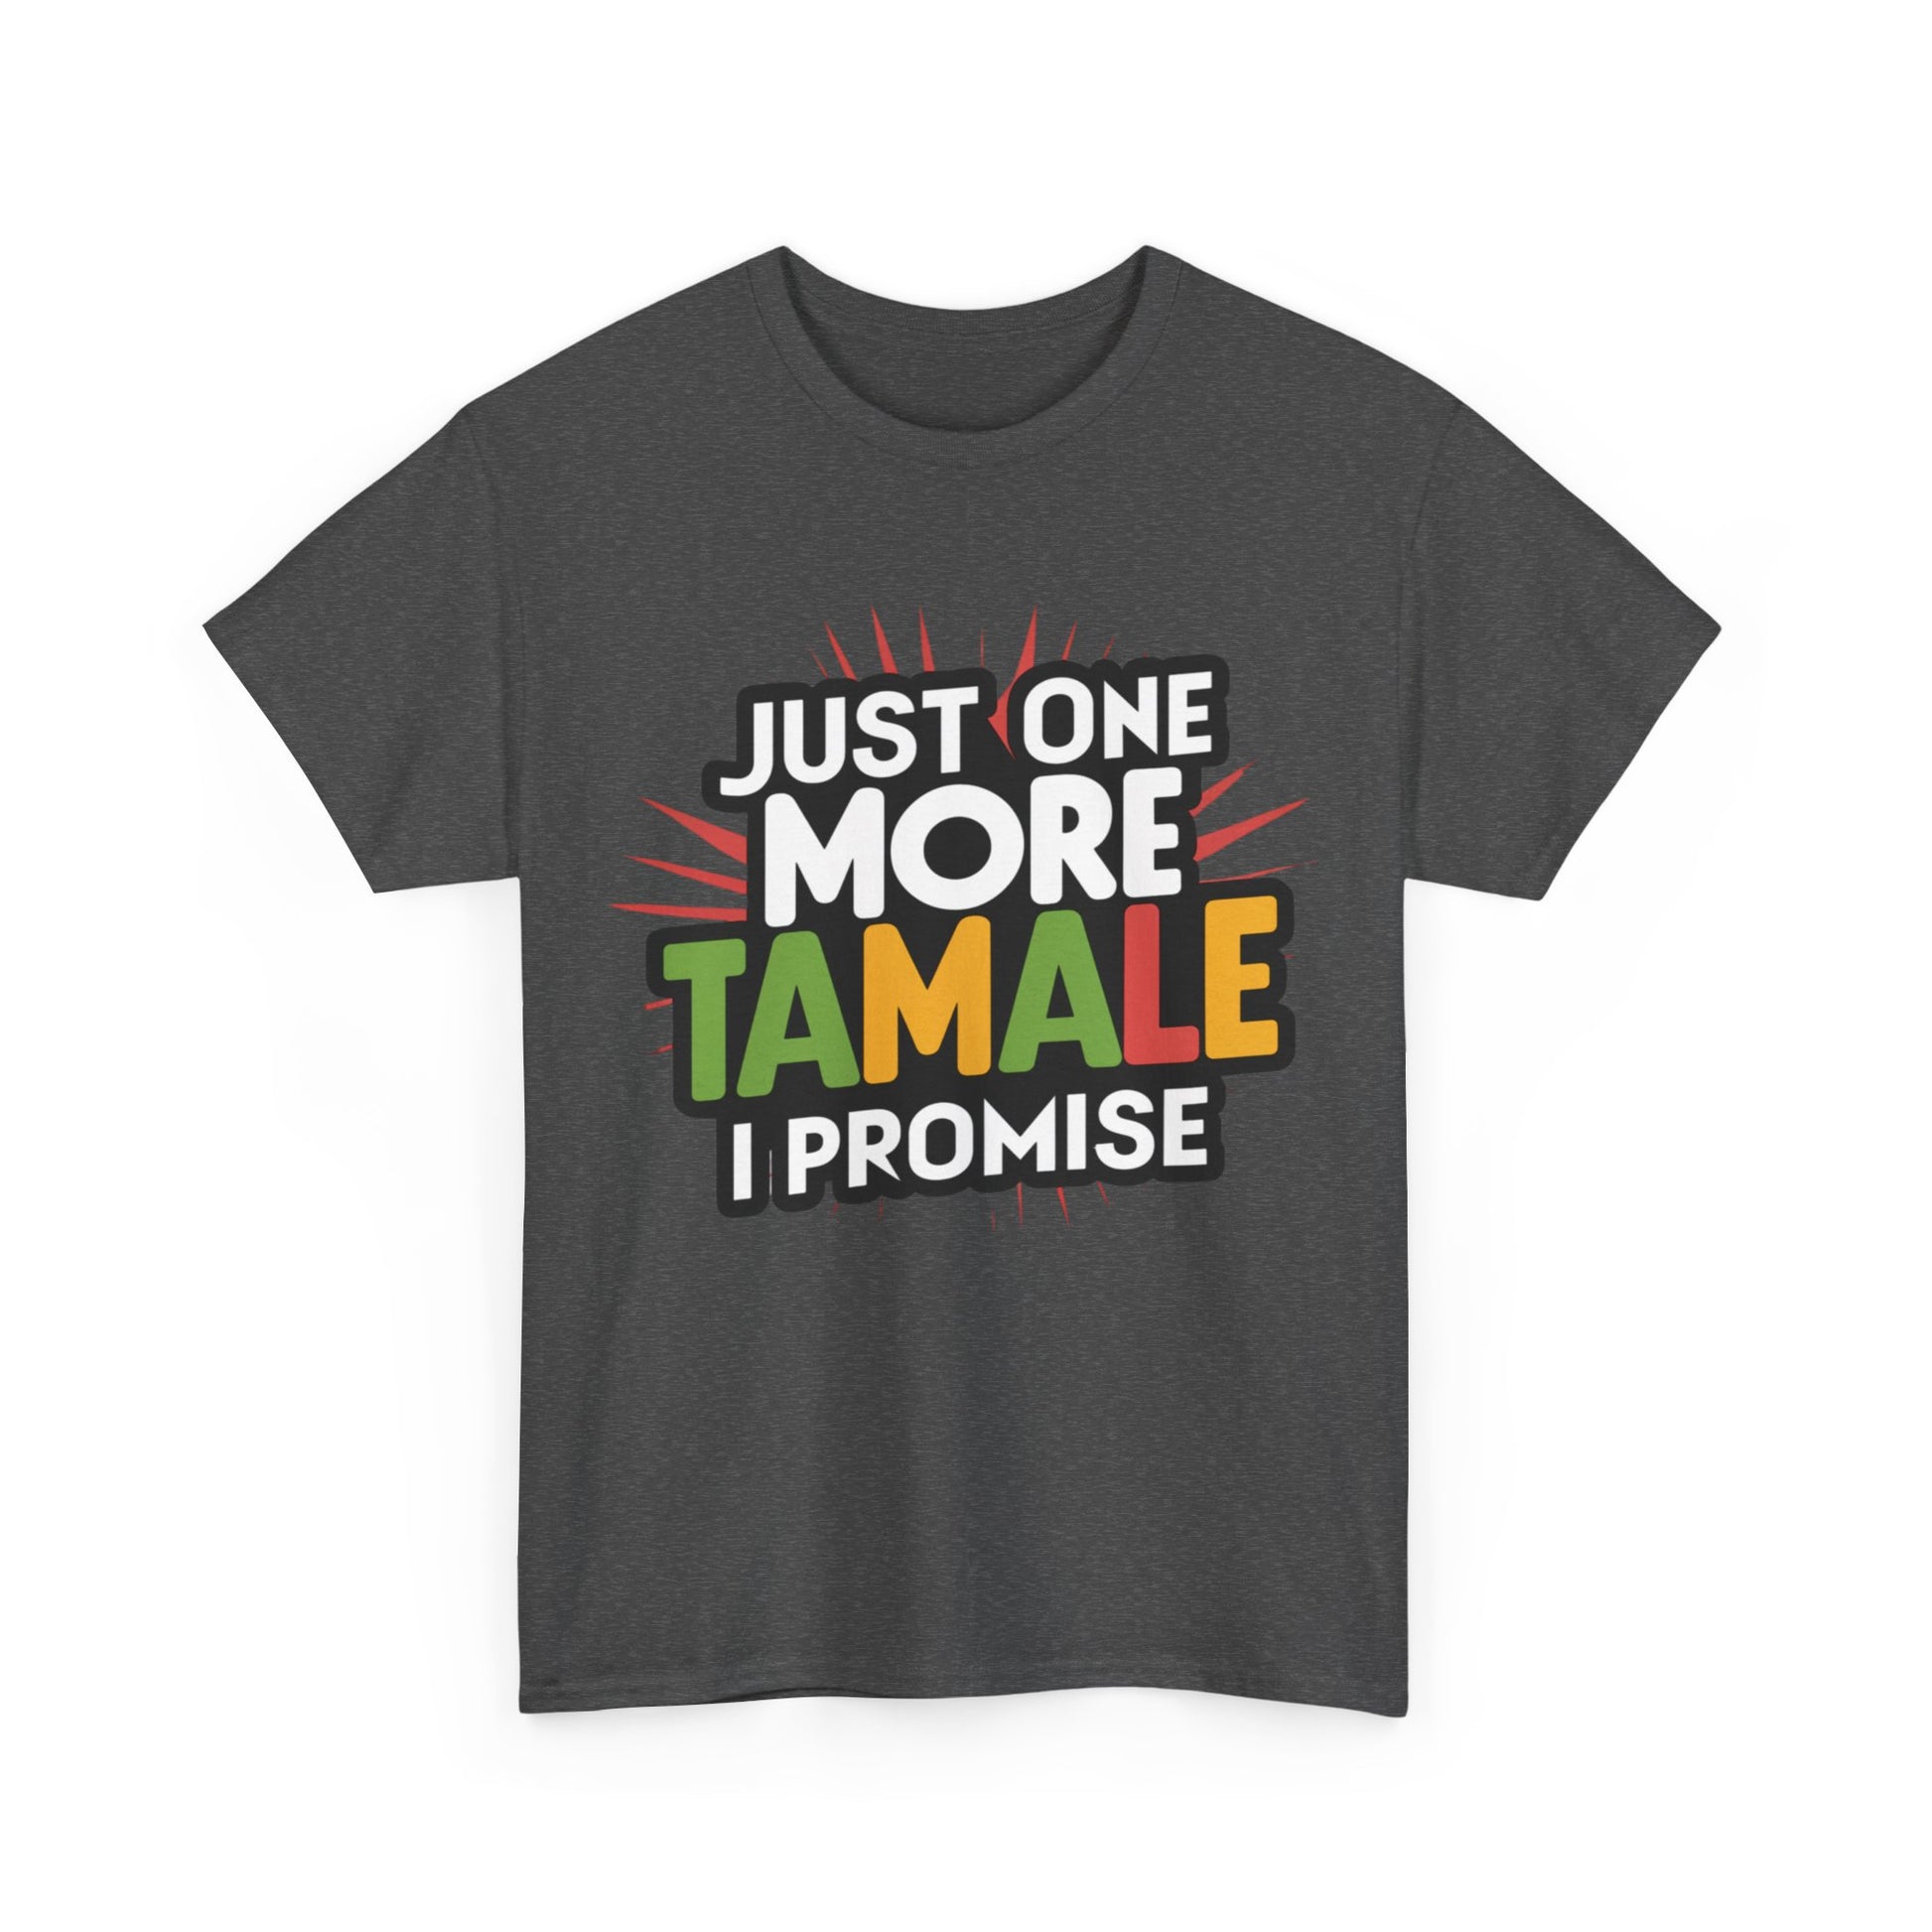 Just One More Tamale I Promise Mexican Food Graphic Unisex Heavy Cotton Tee Cotton Funny Humorous Graphic Soft Premium Unisex Men Women Dark Heather T-shirt Birthday Gift-24